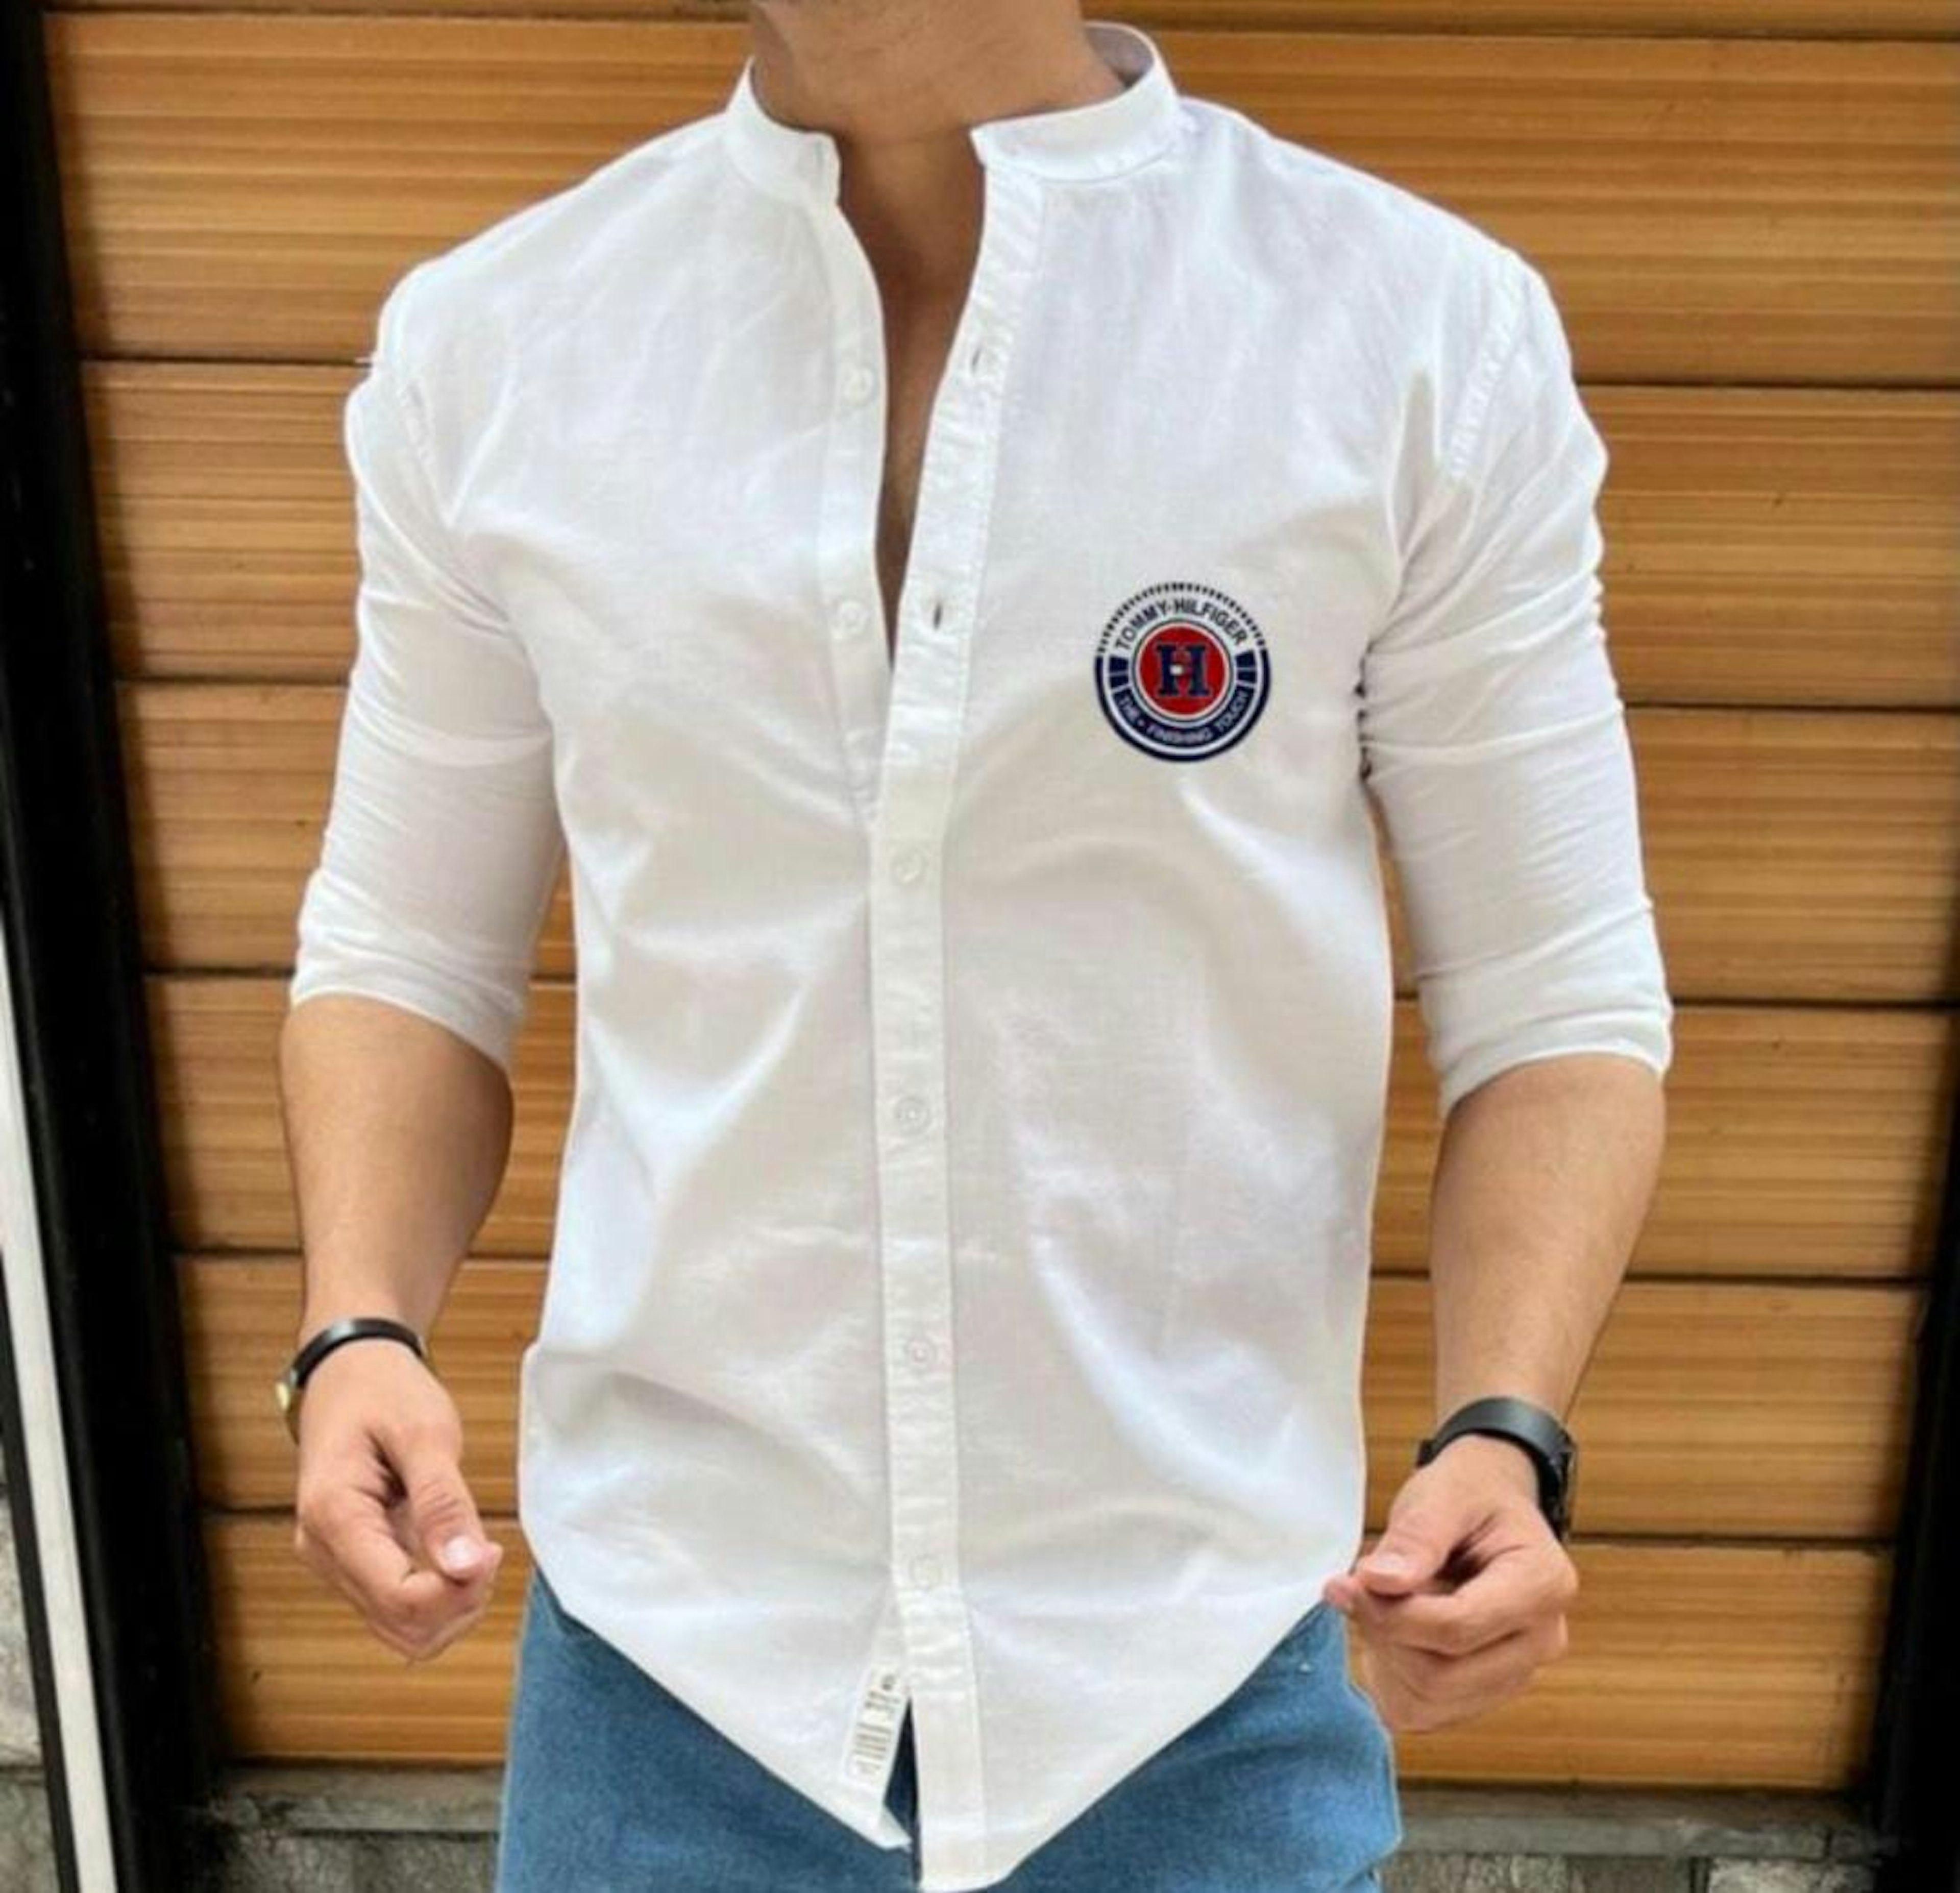 View - Tommy Hilfiger Shirt photos, Tommy Hilfiger Shirt available in Ahmedabad, make deal in 450